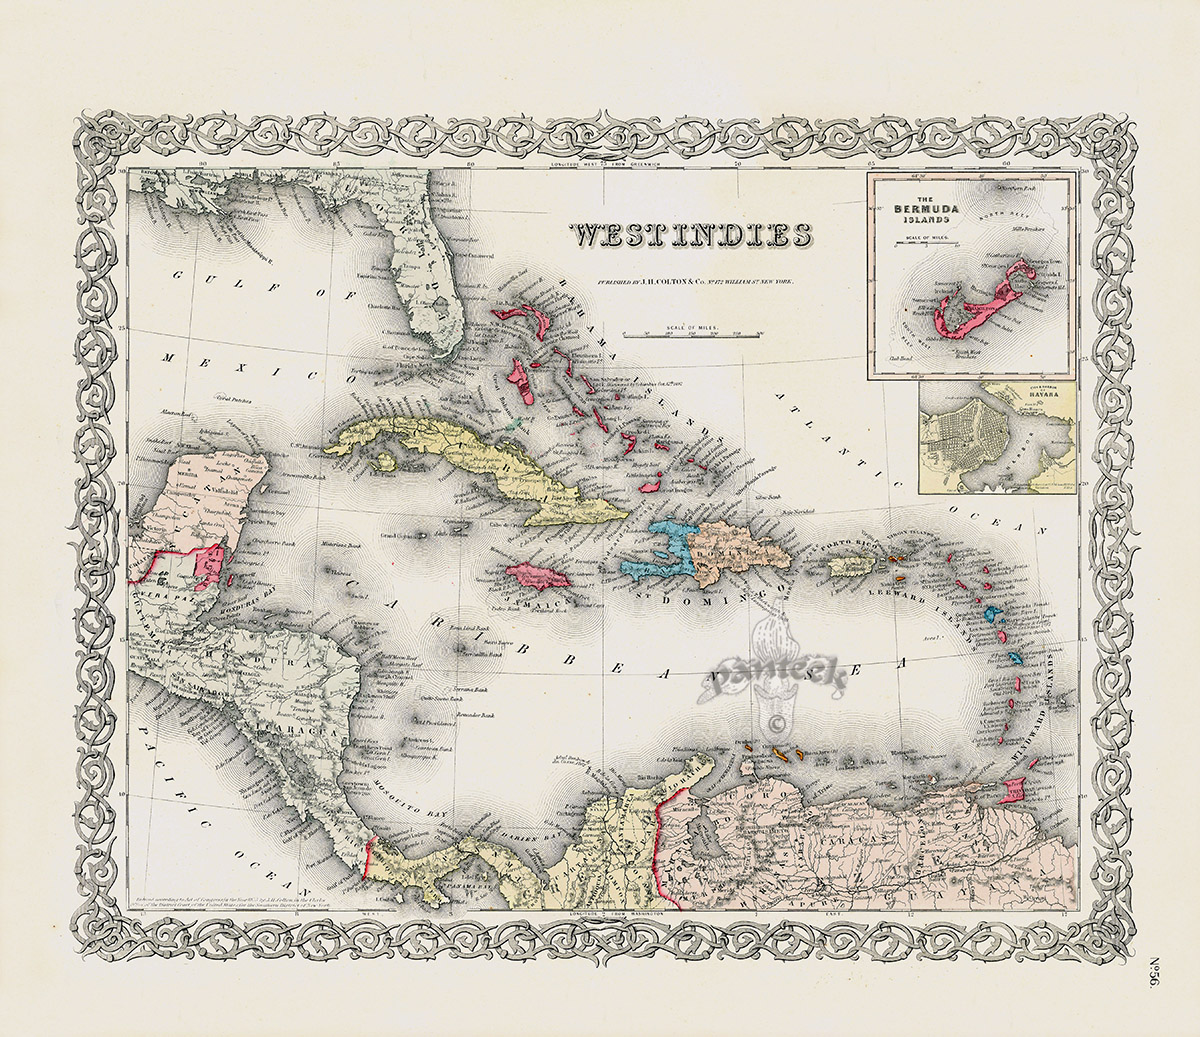 Map of the West Indies and Bermuda Islands by Cartographer Joseph Hutchins Colton c 1865